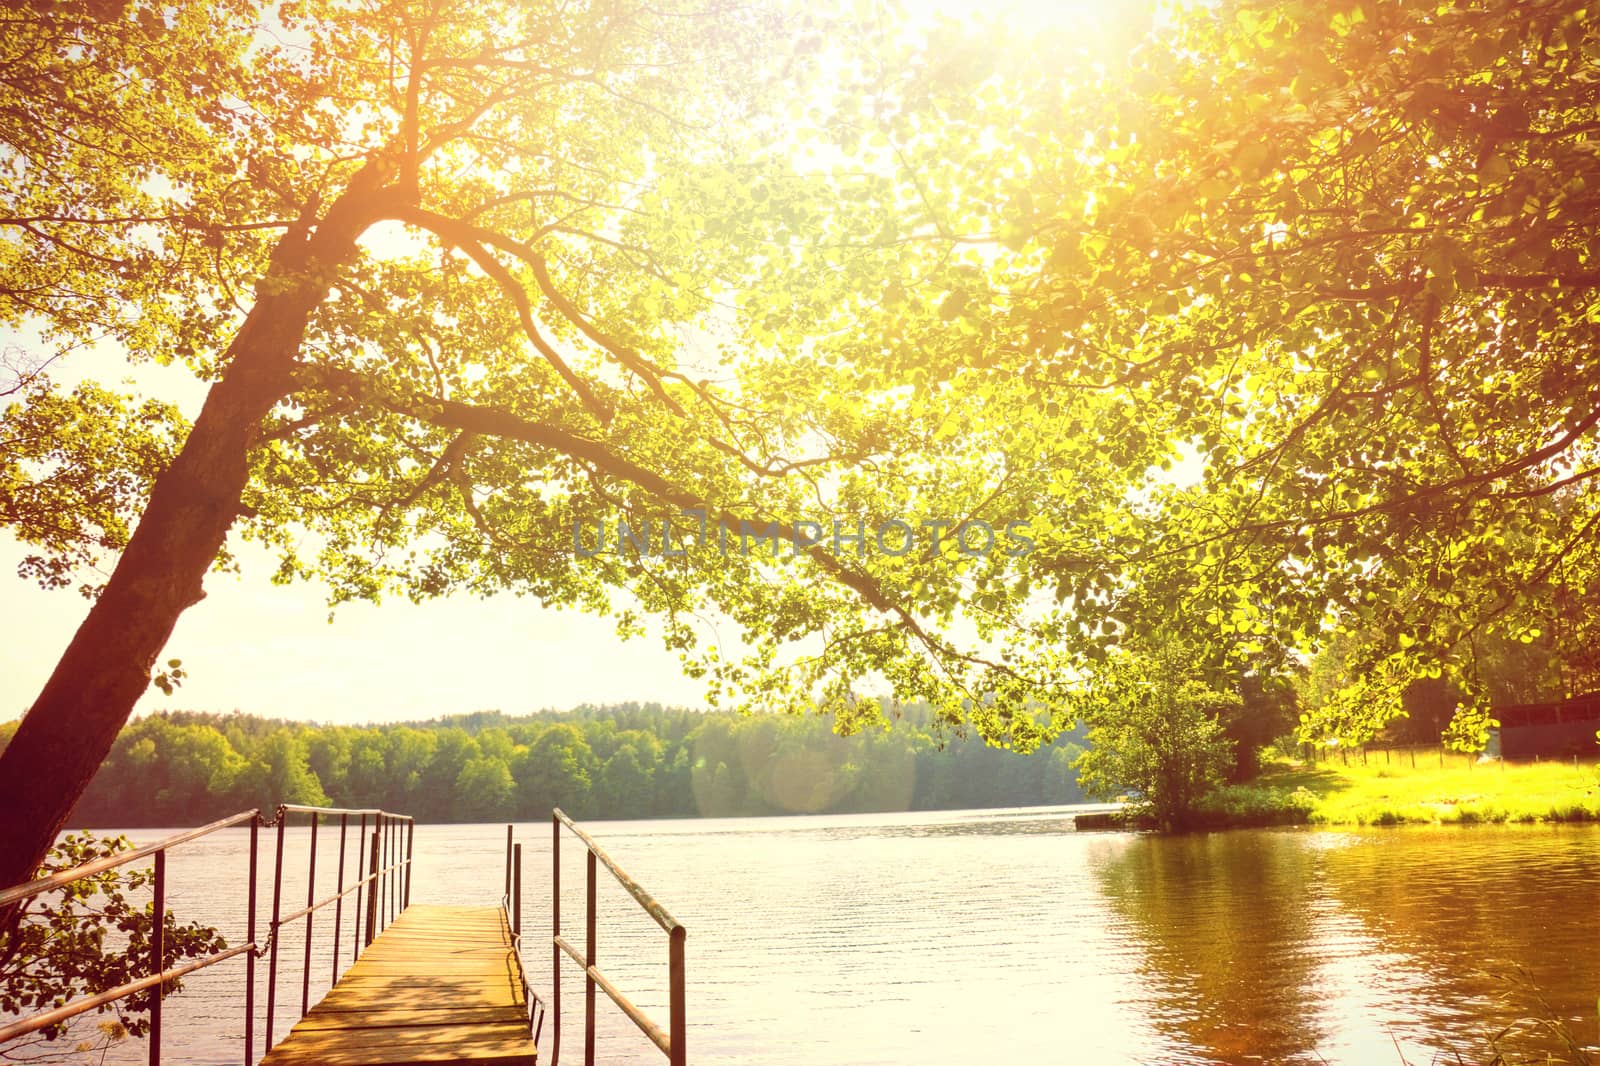 Beautiful bright day summer scenery. Lake and trees.